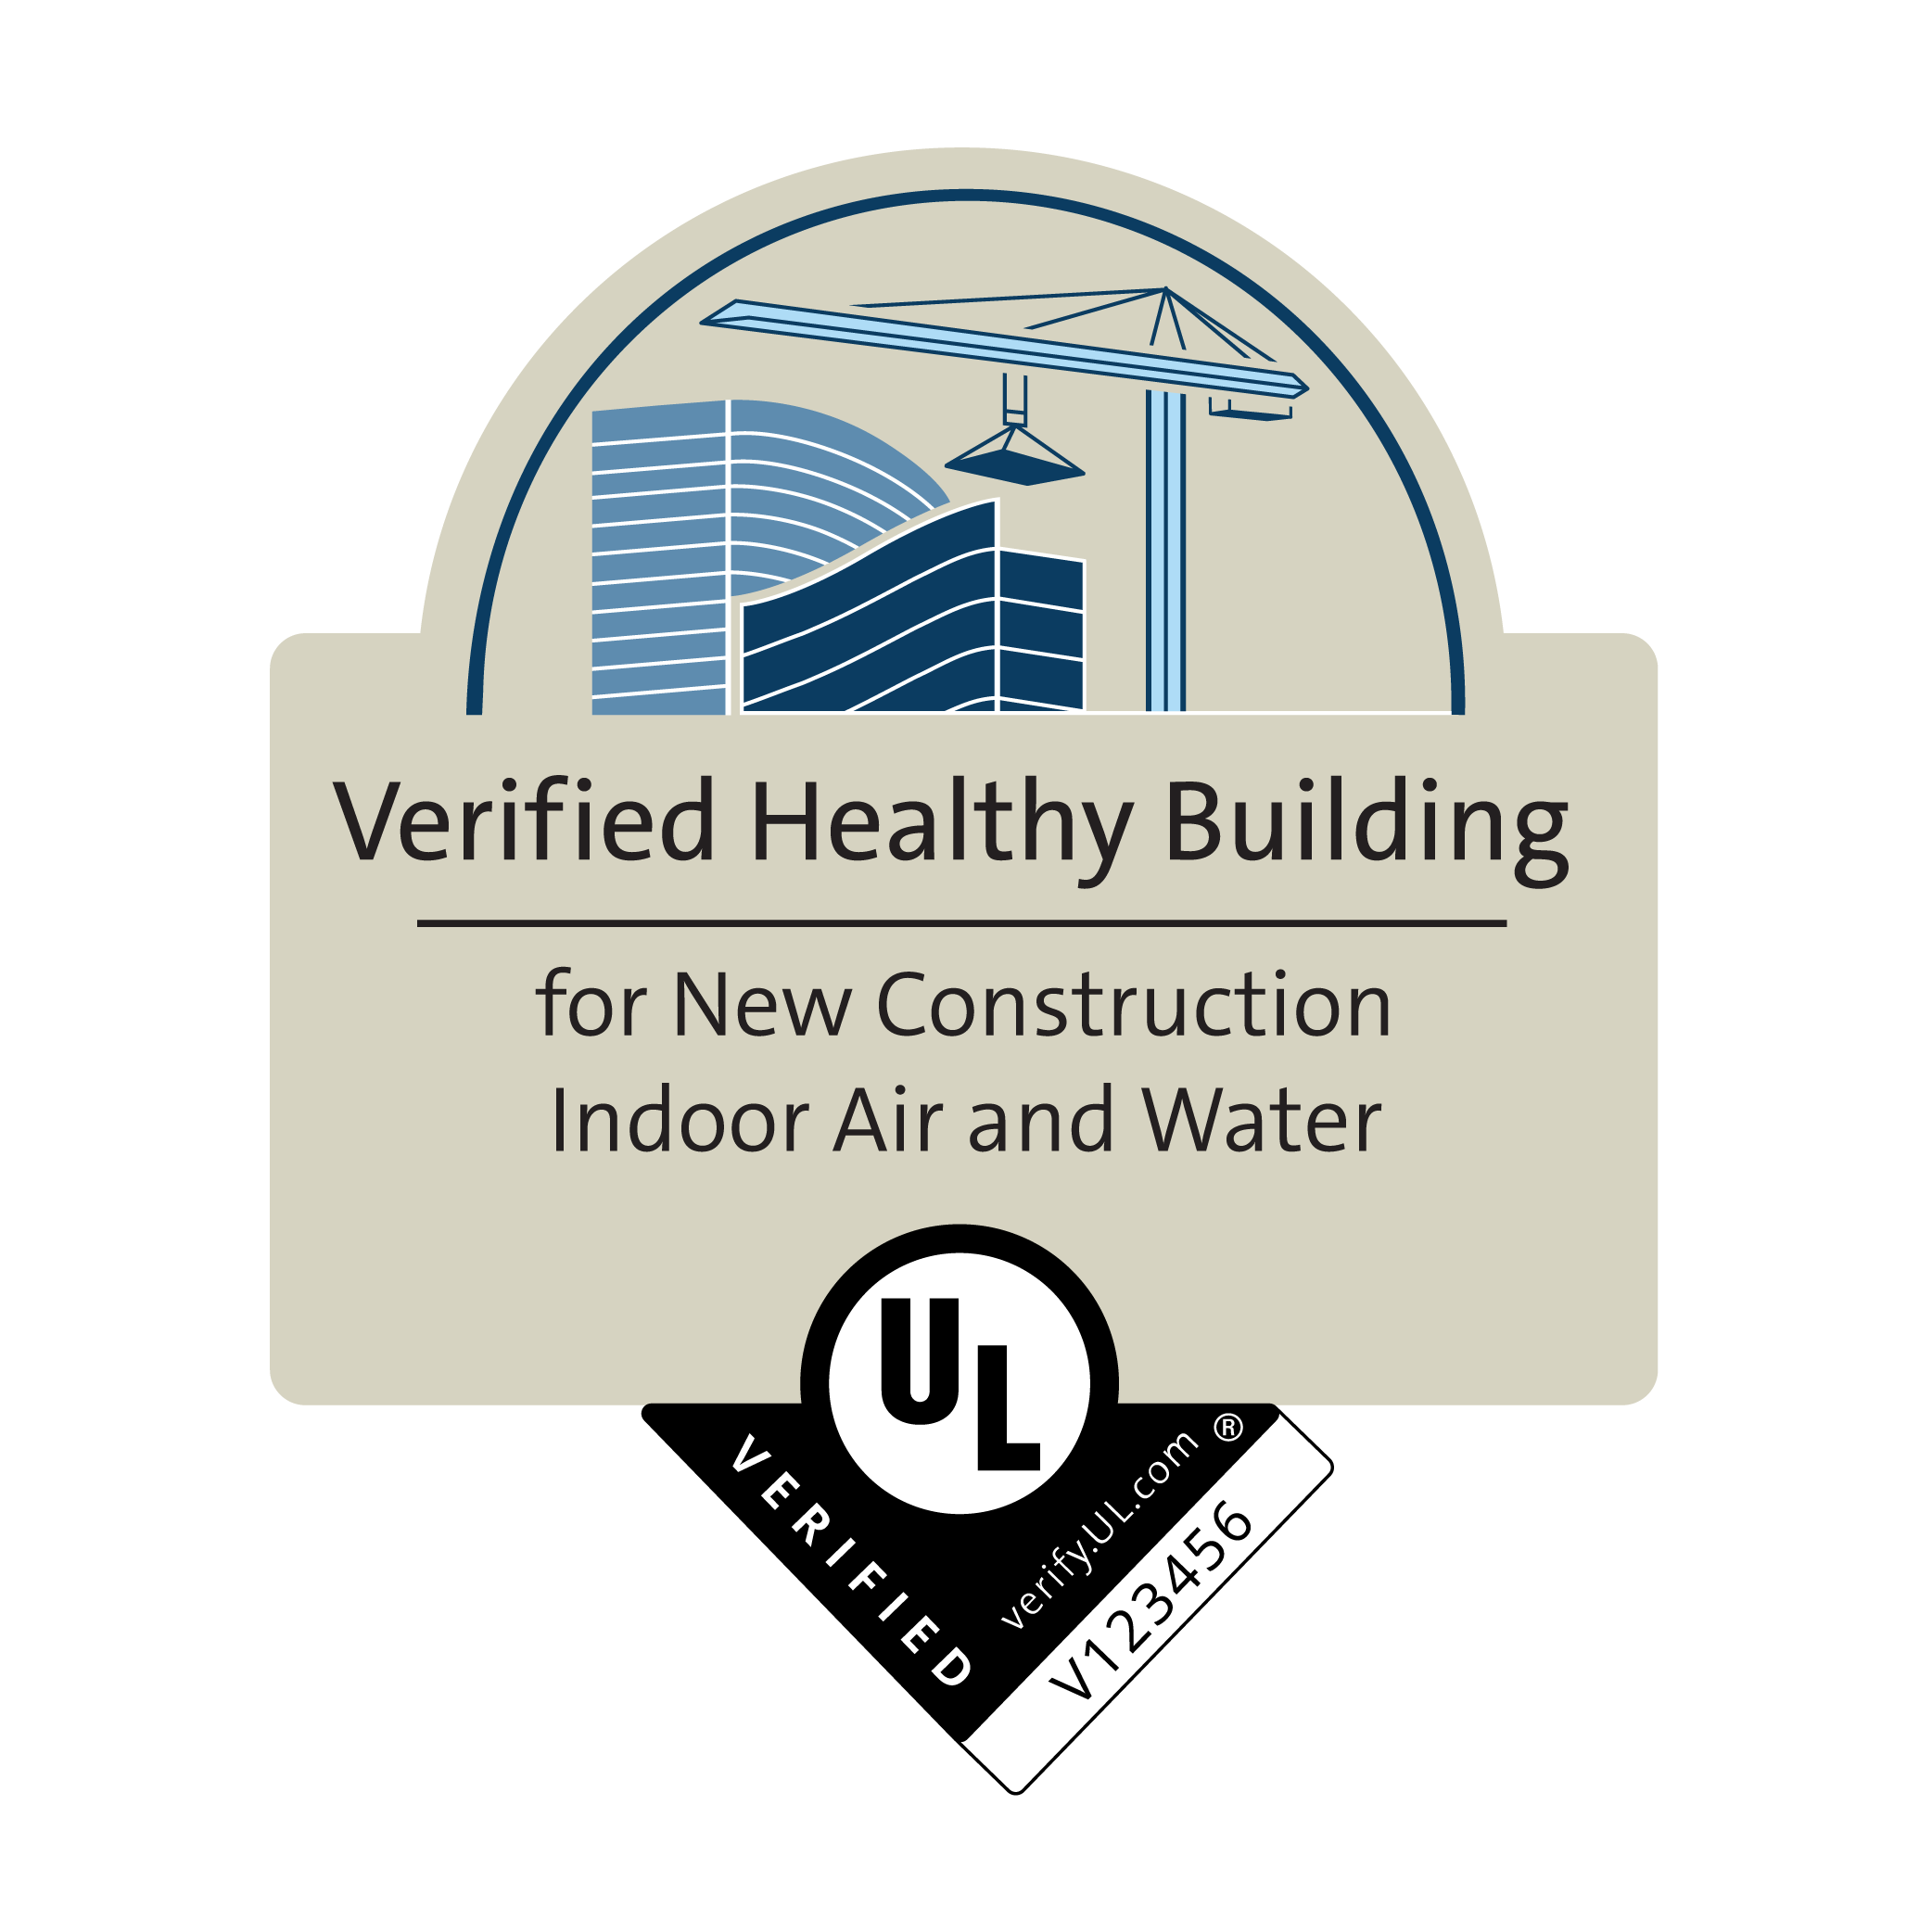 UL Verified Healthy Building for New Construction Indoor Air and Water Verification Mark